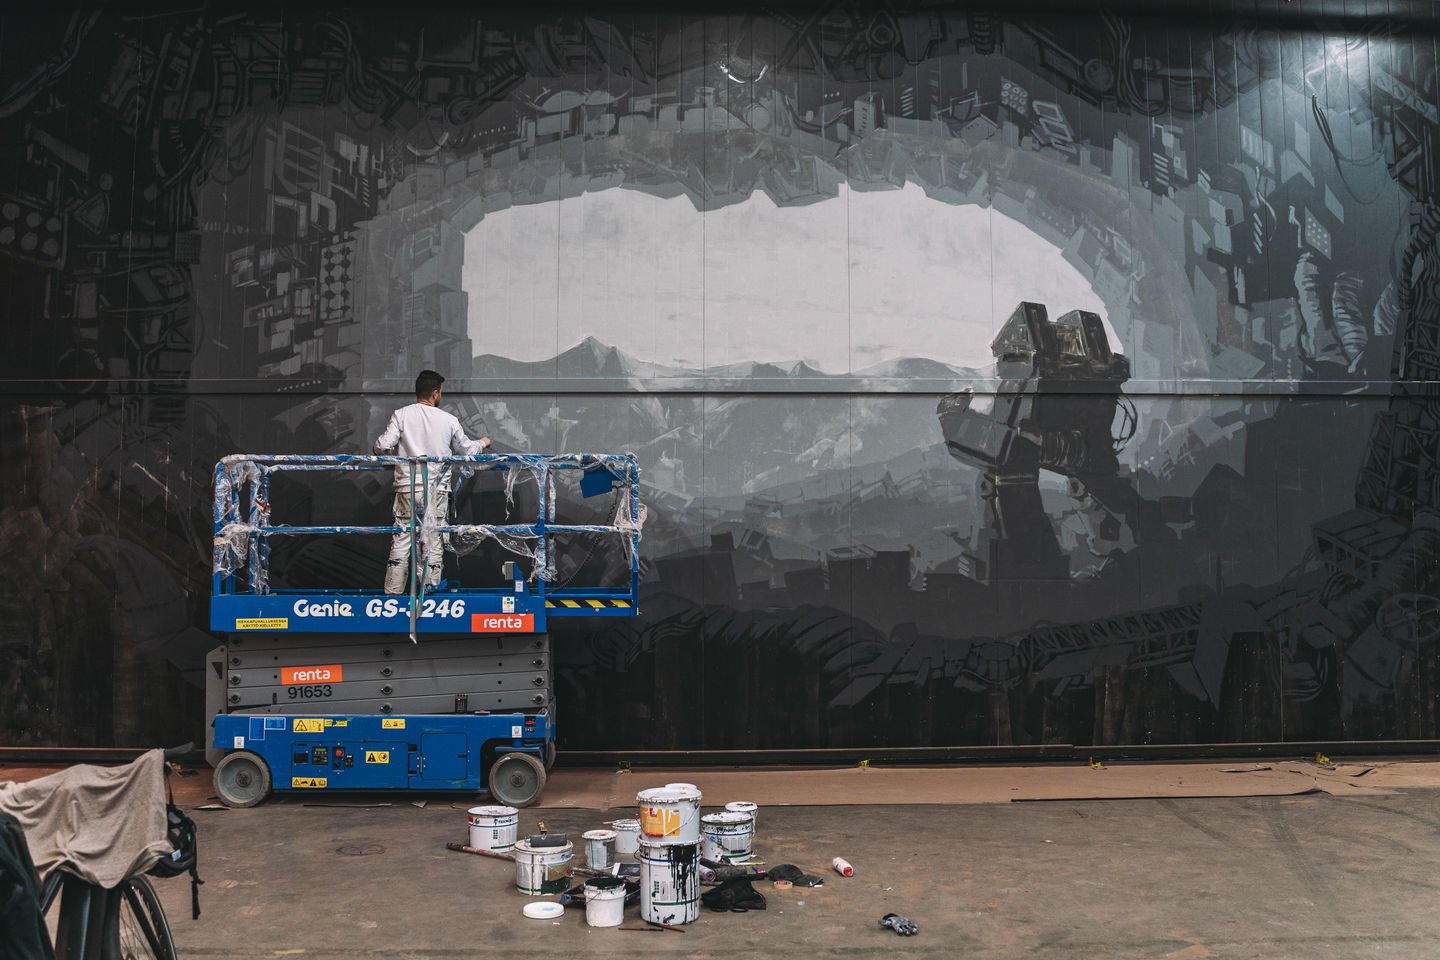 Artist Jesse stands on a scissor lift to paint the greyscale mural in Keran Hallit